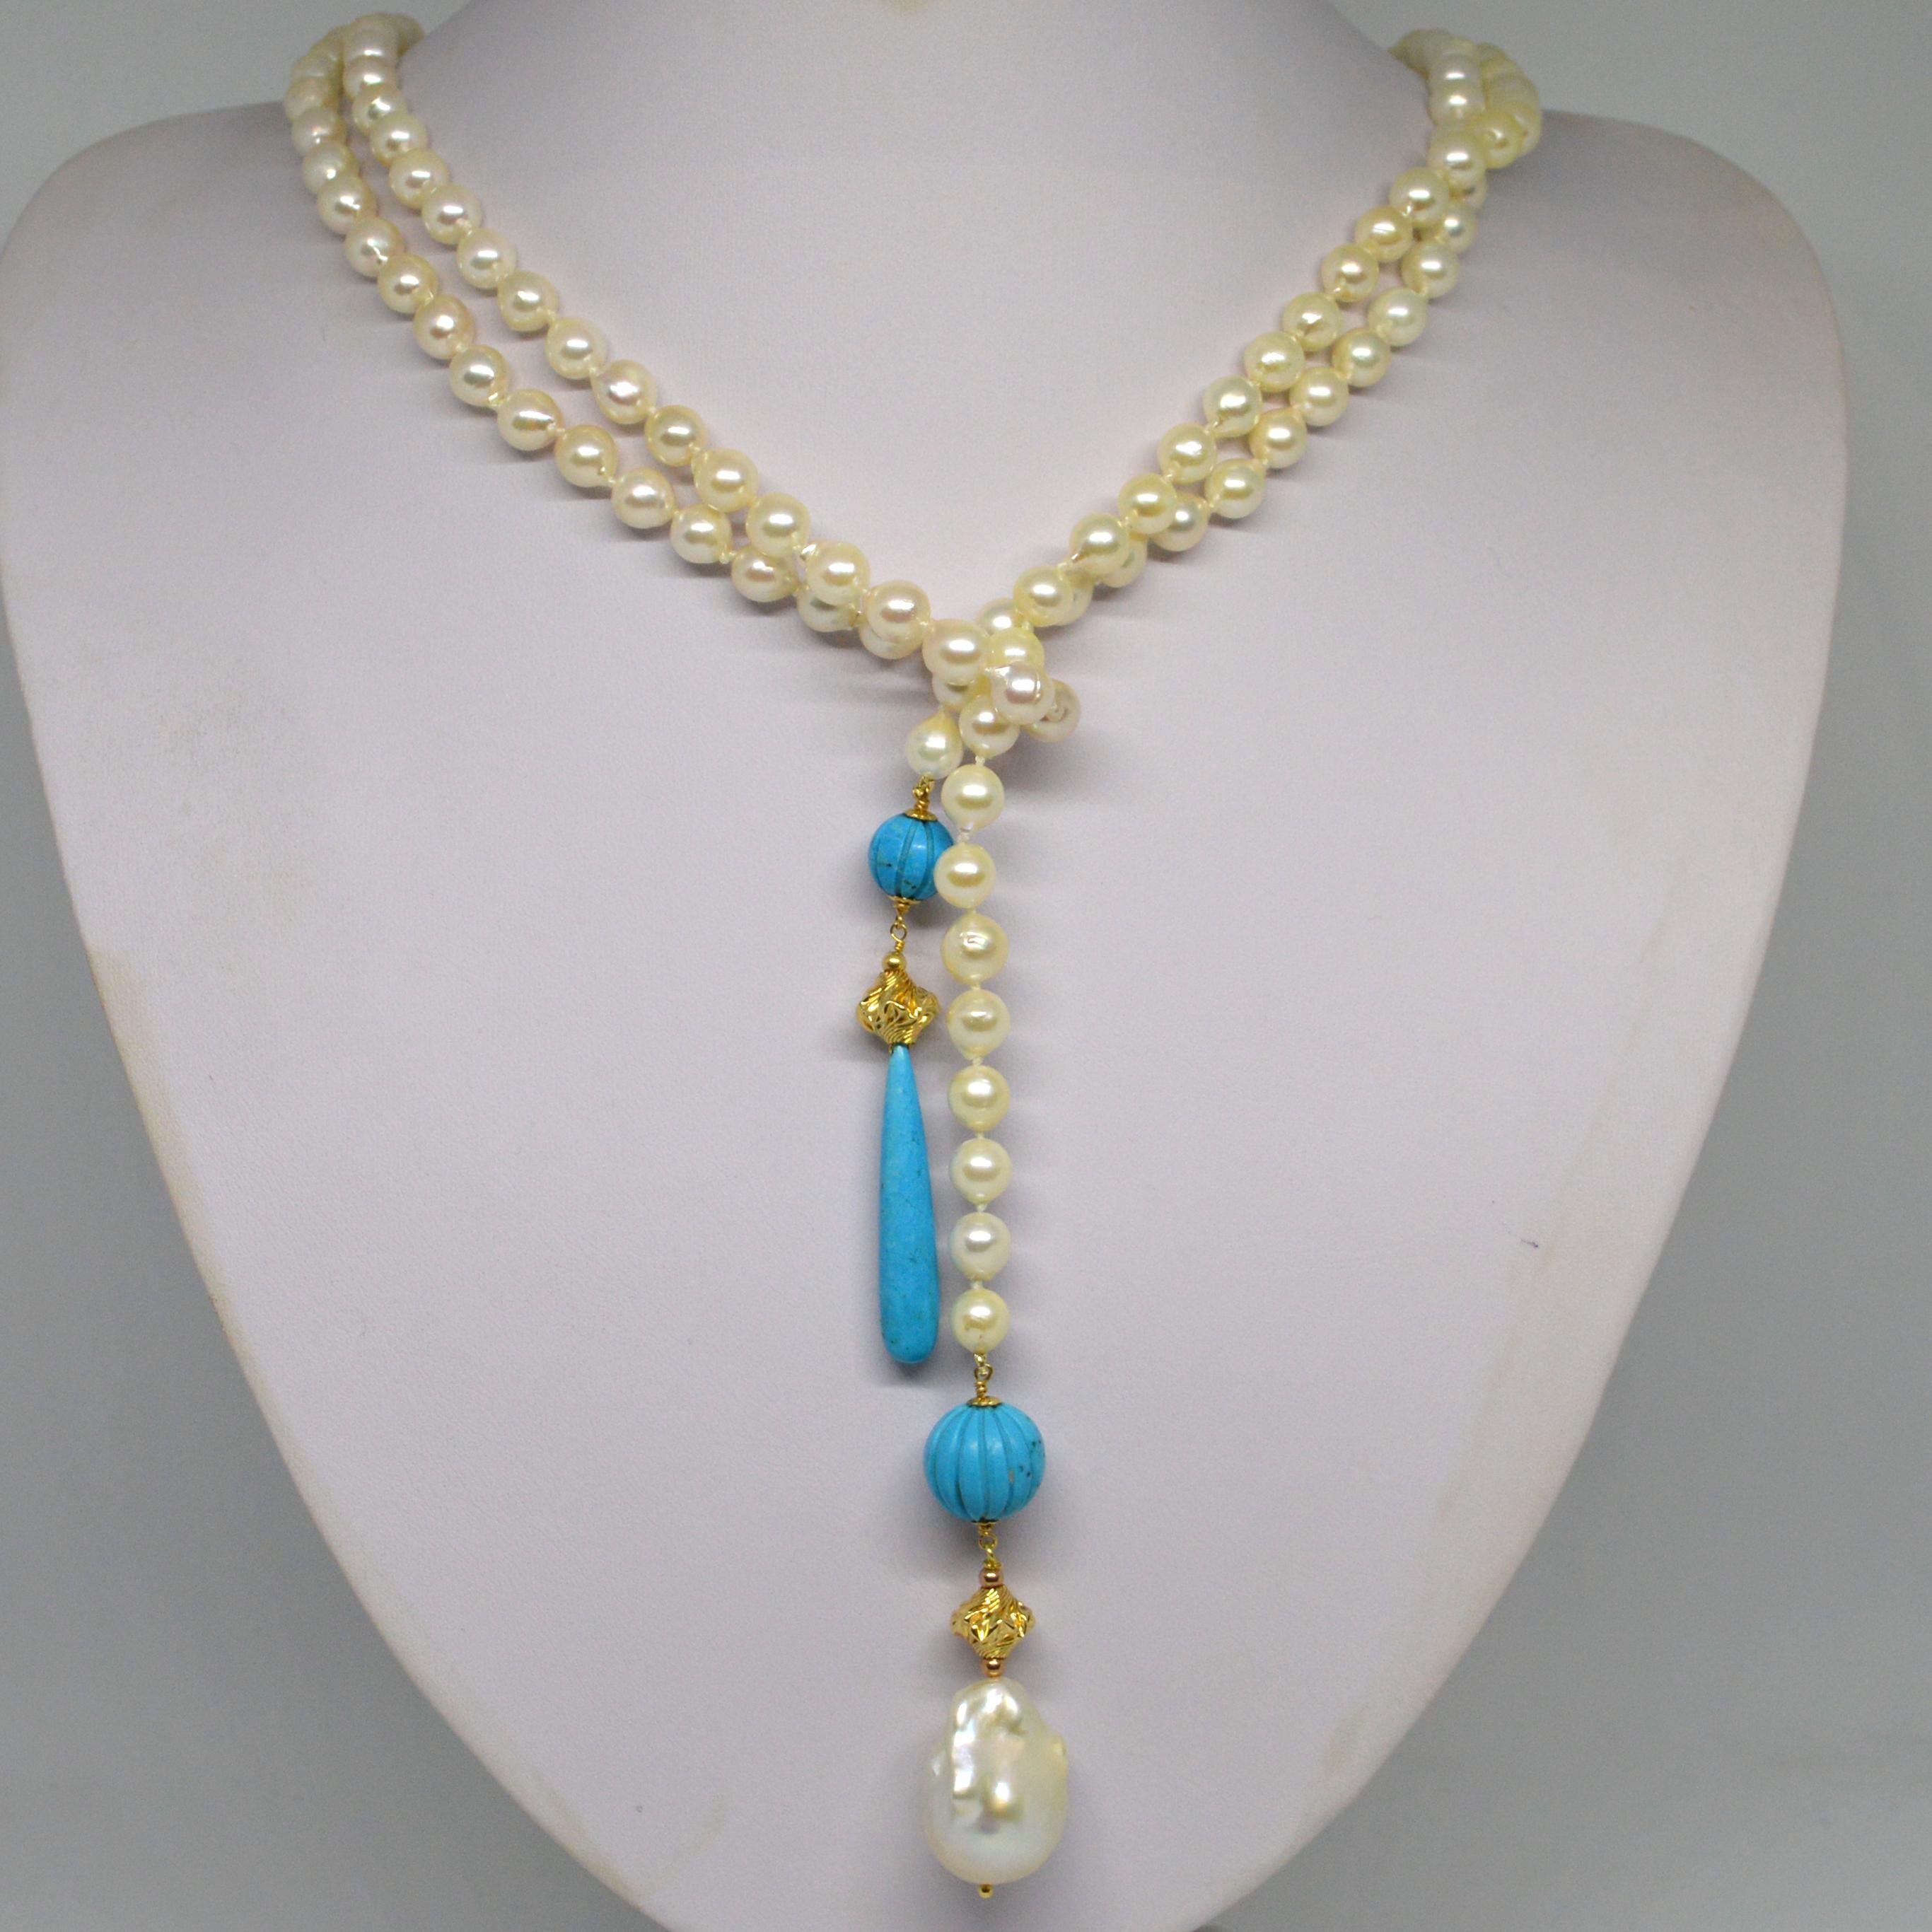 Versatile scarf style lariat necklace with 7-7.5mm Akoya Pearls with Carved Turquoise round 10 and 14mm round beads, large 24x16mm Baroque Fresh Water Pearl, hand knotted for strength and durability.

Total length 1.4m 55 inches